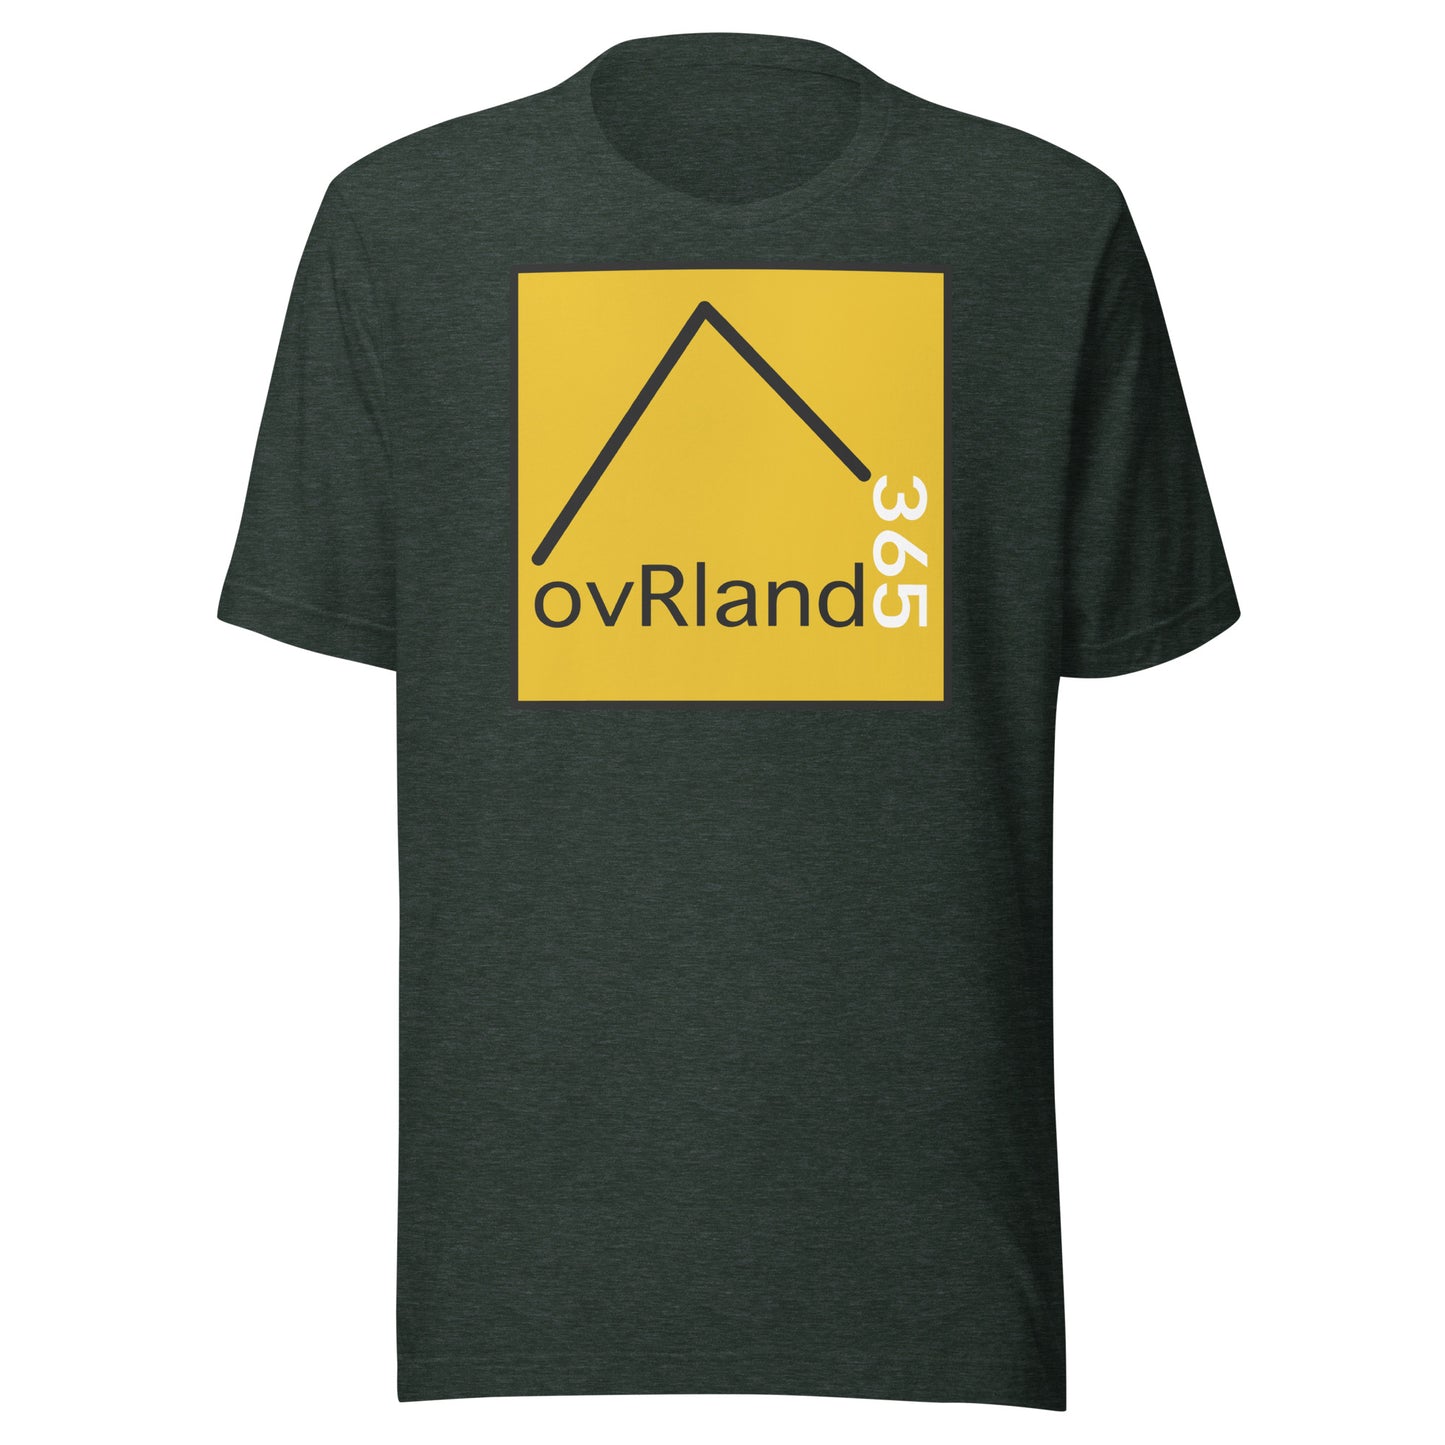 Classic ovRland365 t-shirt, forest. overland365.com